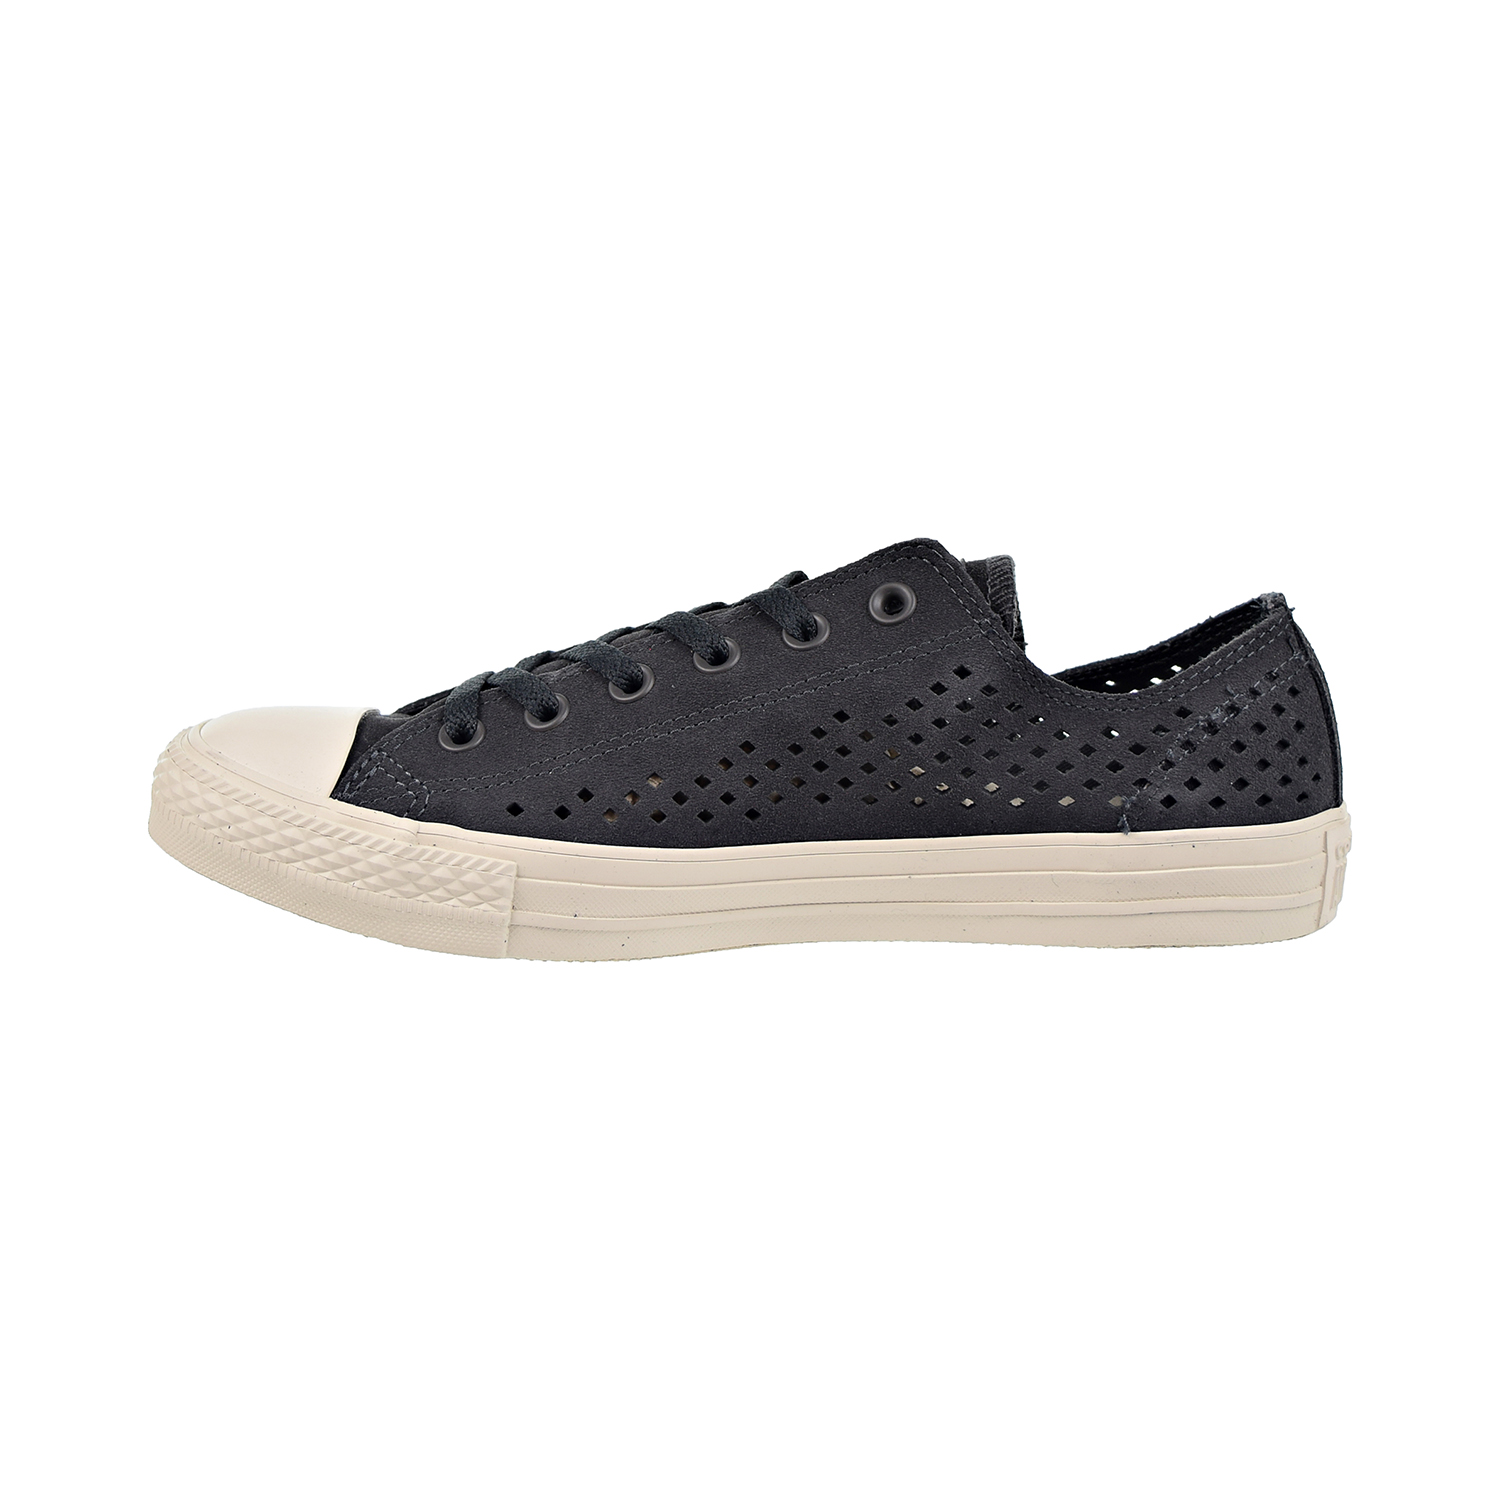 Converse Chuck Taylor All Star Ox Men's Shoes Perforated Almost Black 160464c - image 4 of 6